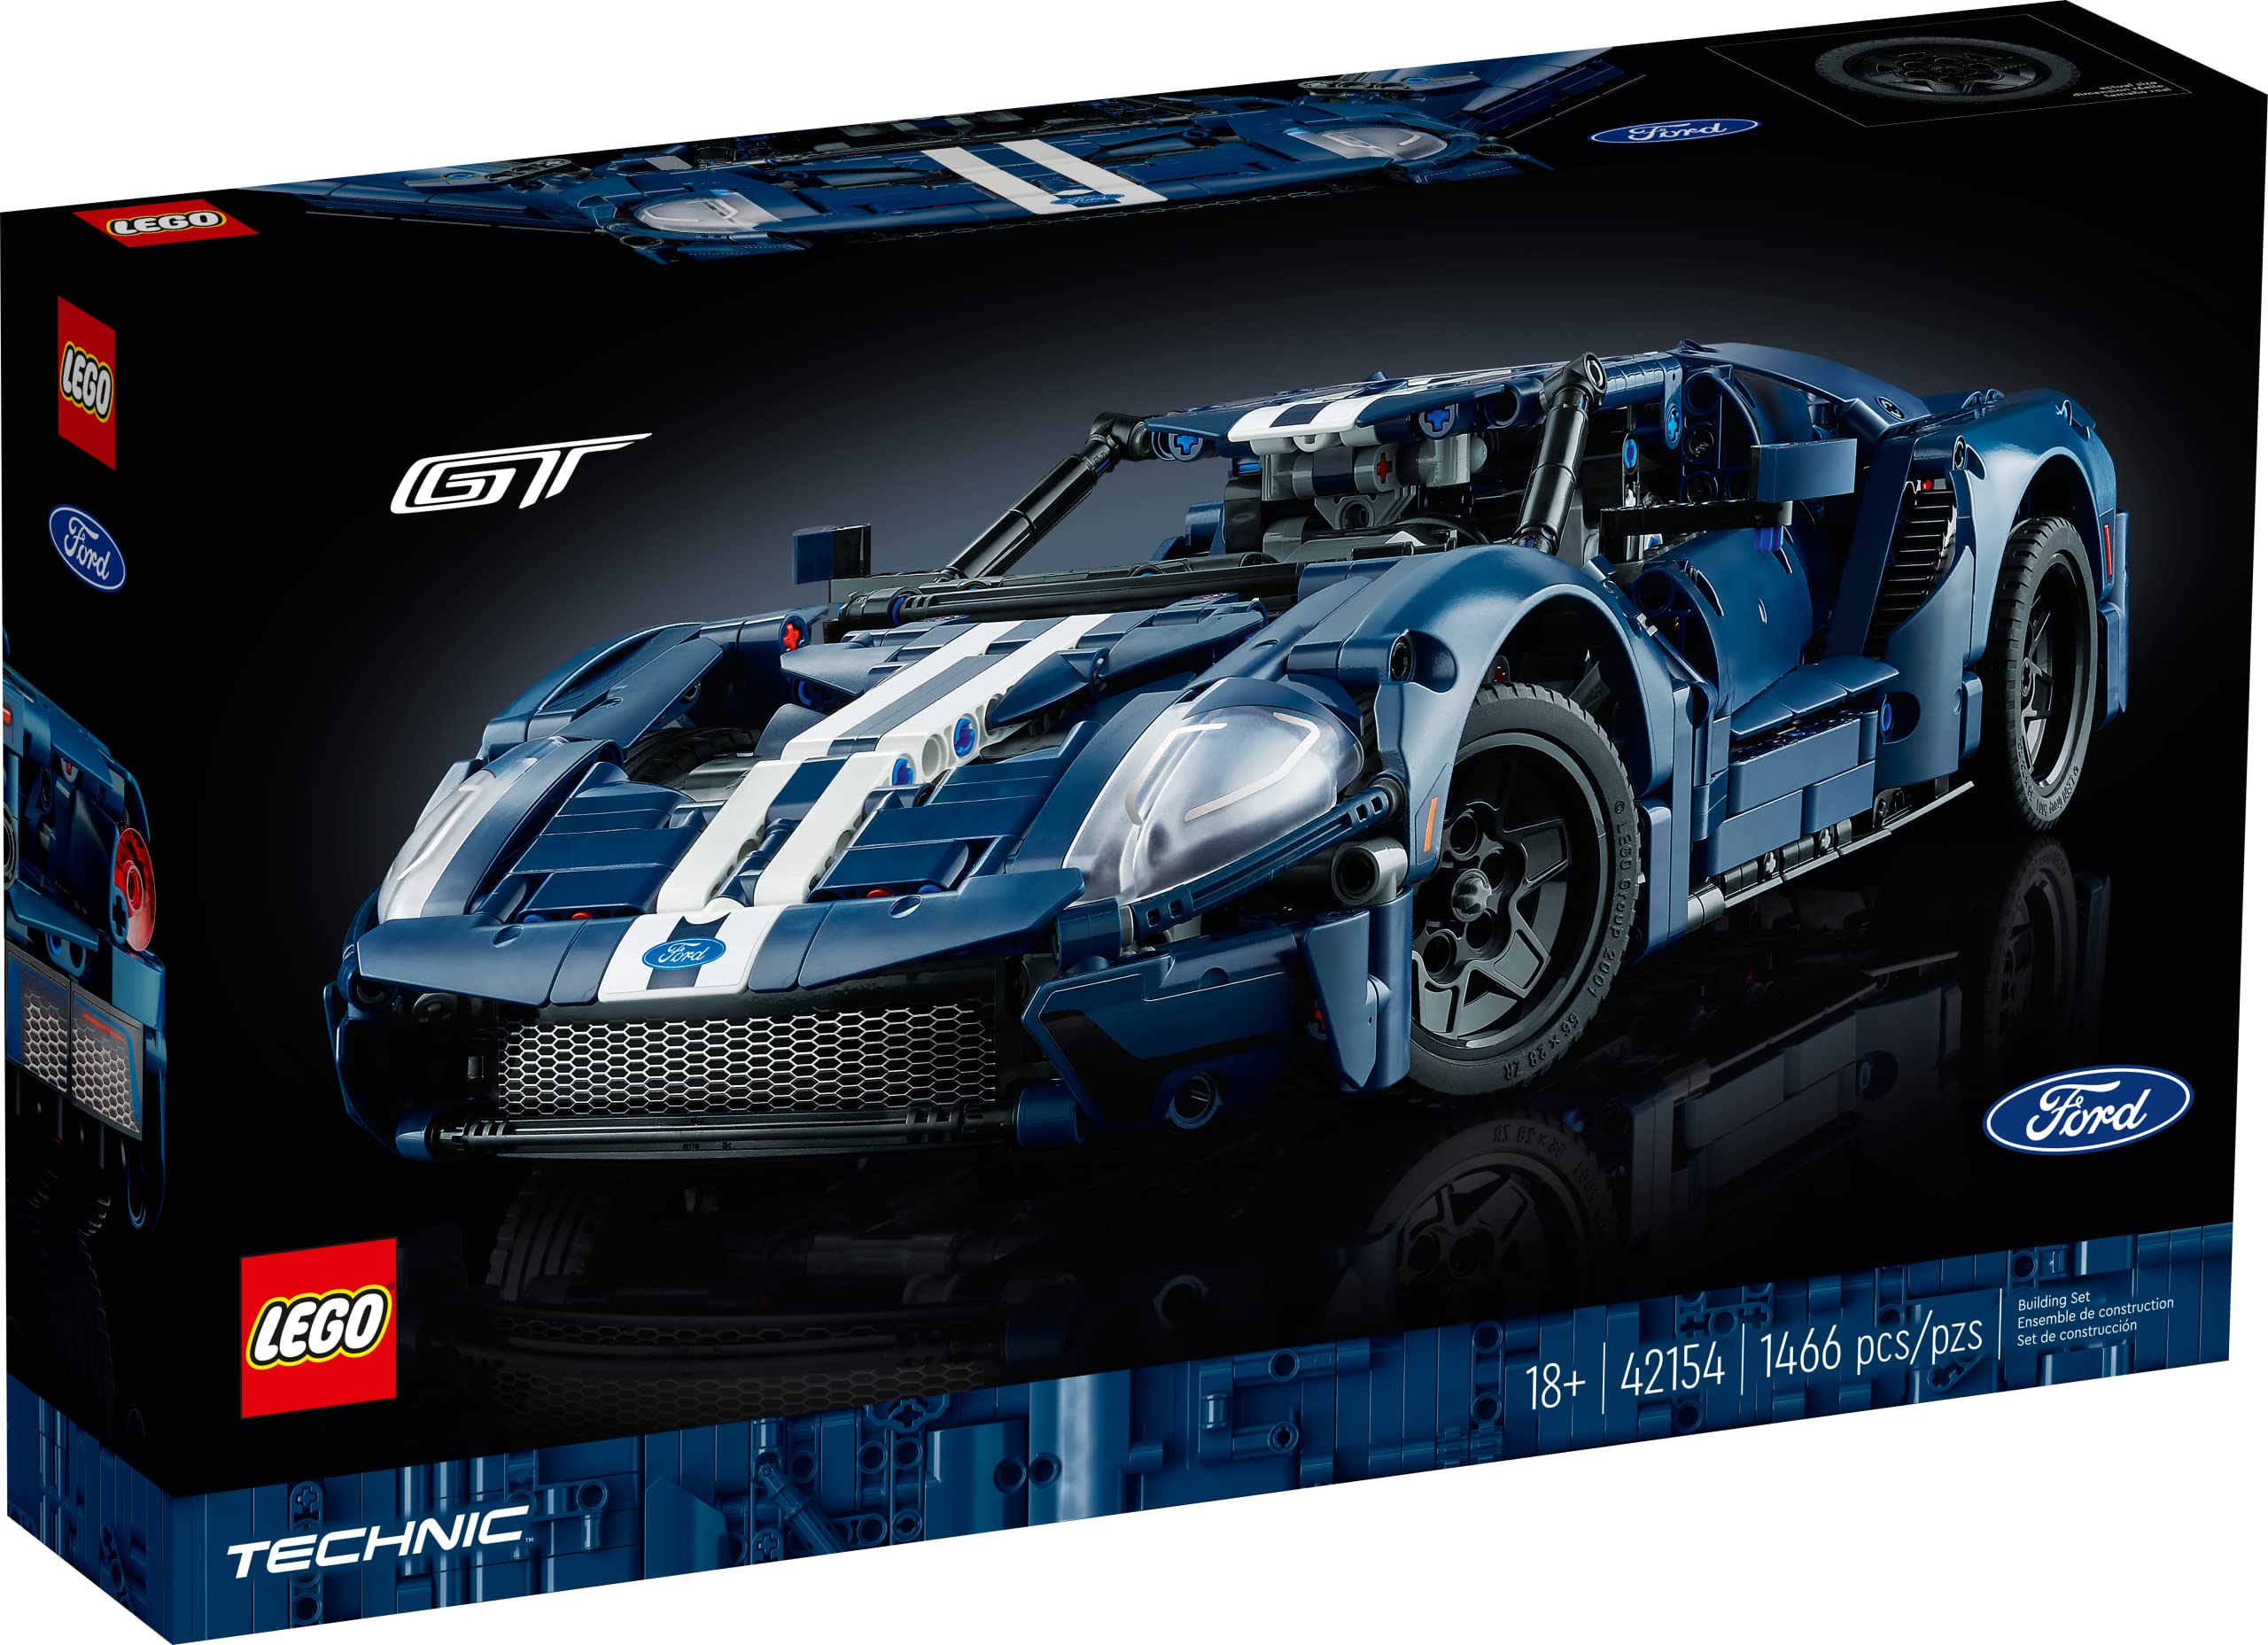 LEGO Technic 2022 Ford GT 42154 Car Model Kit for Adults to Build, 1:12 Scale Supercar with Authentic Features, Collectible Set, Idea That Fuels Creativity and Imagination